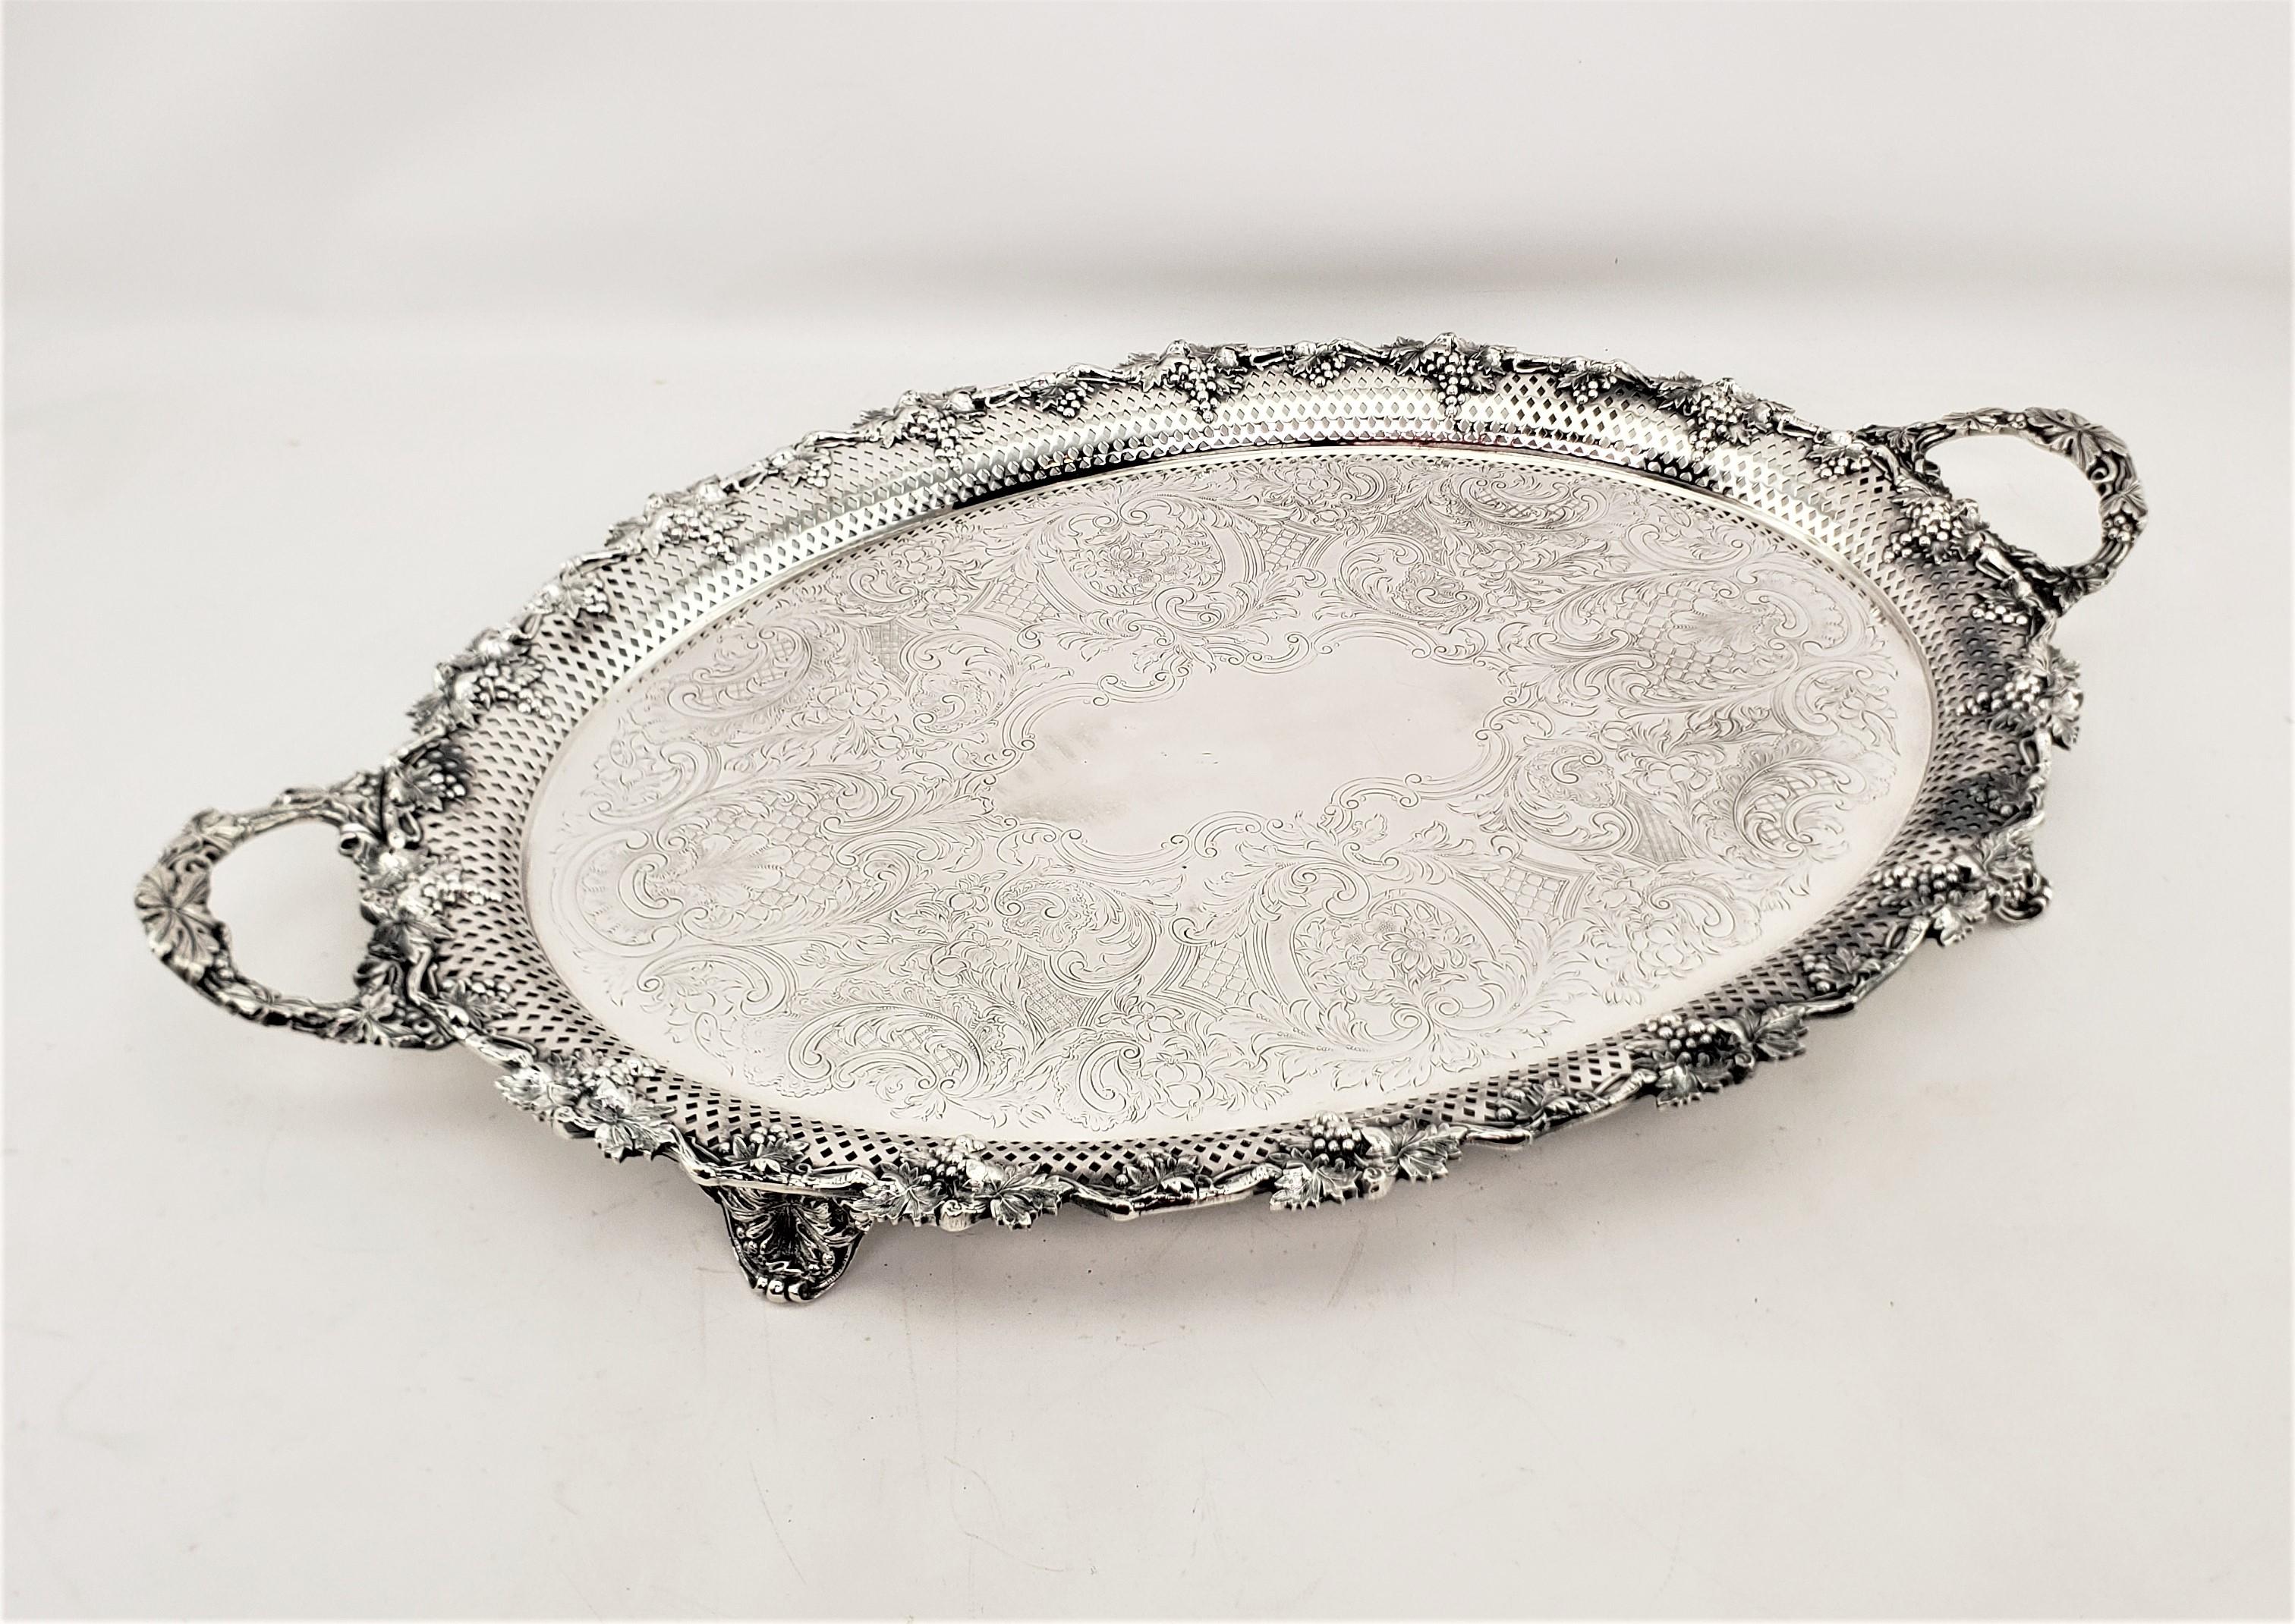 This large silver plated oval tray is unsigned, but presumed to have originated from England and date to approximately 1920 and done in a Victorian style. The tray is decorated with bold grape and leaves around the rim, which is accented by the